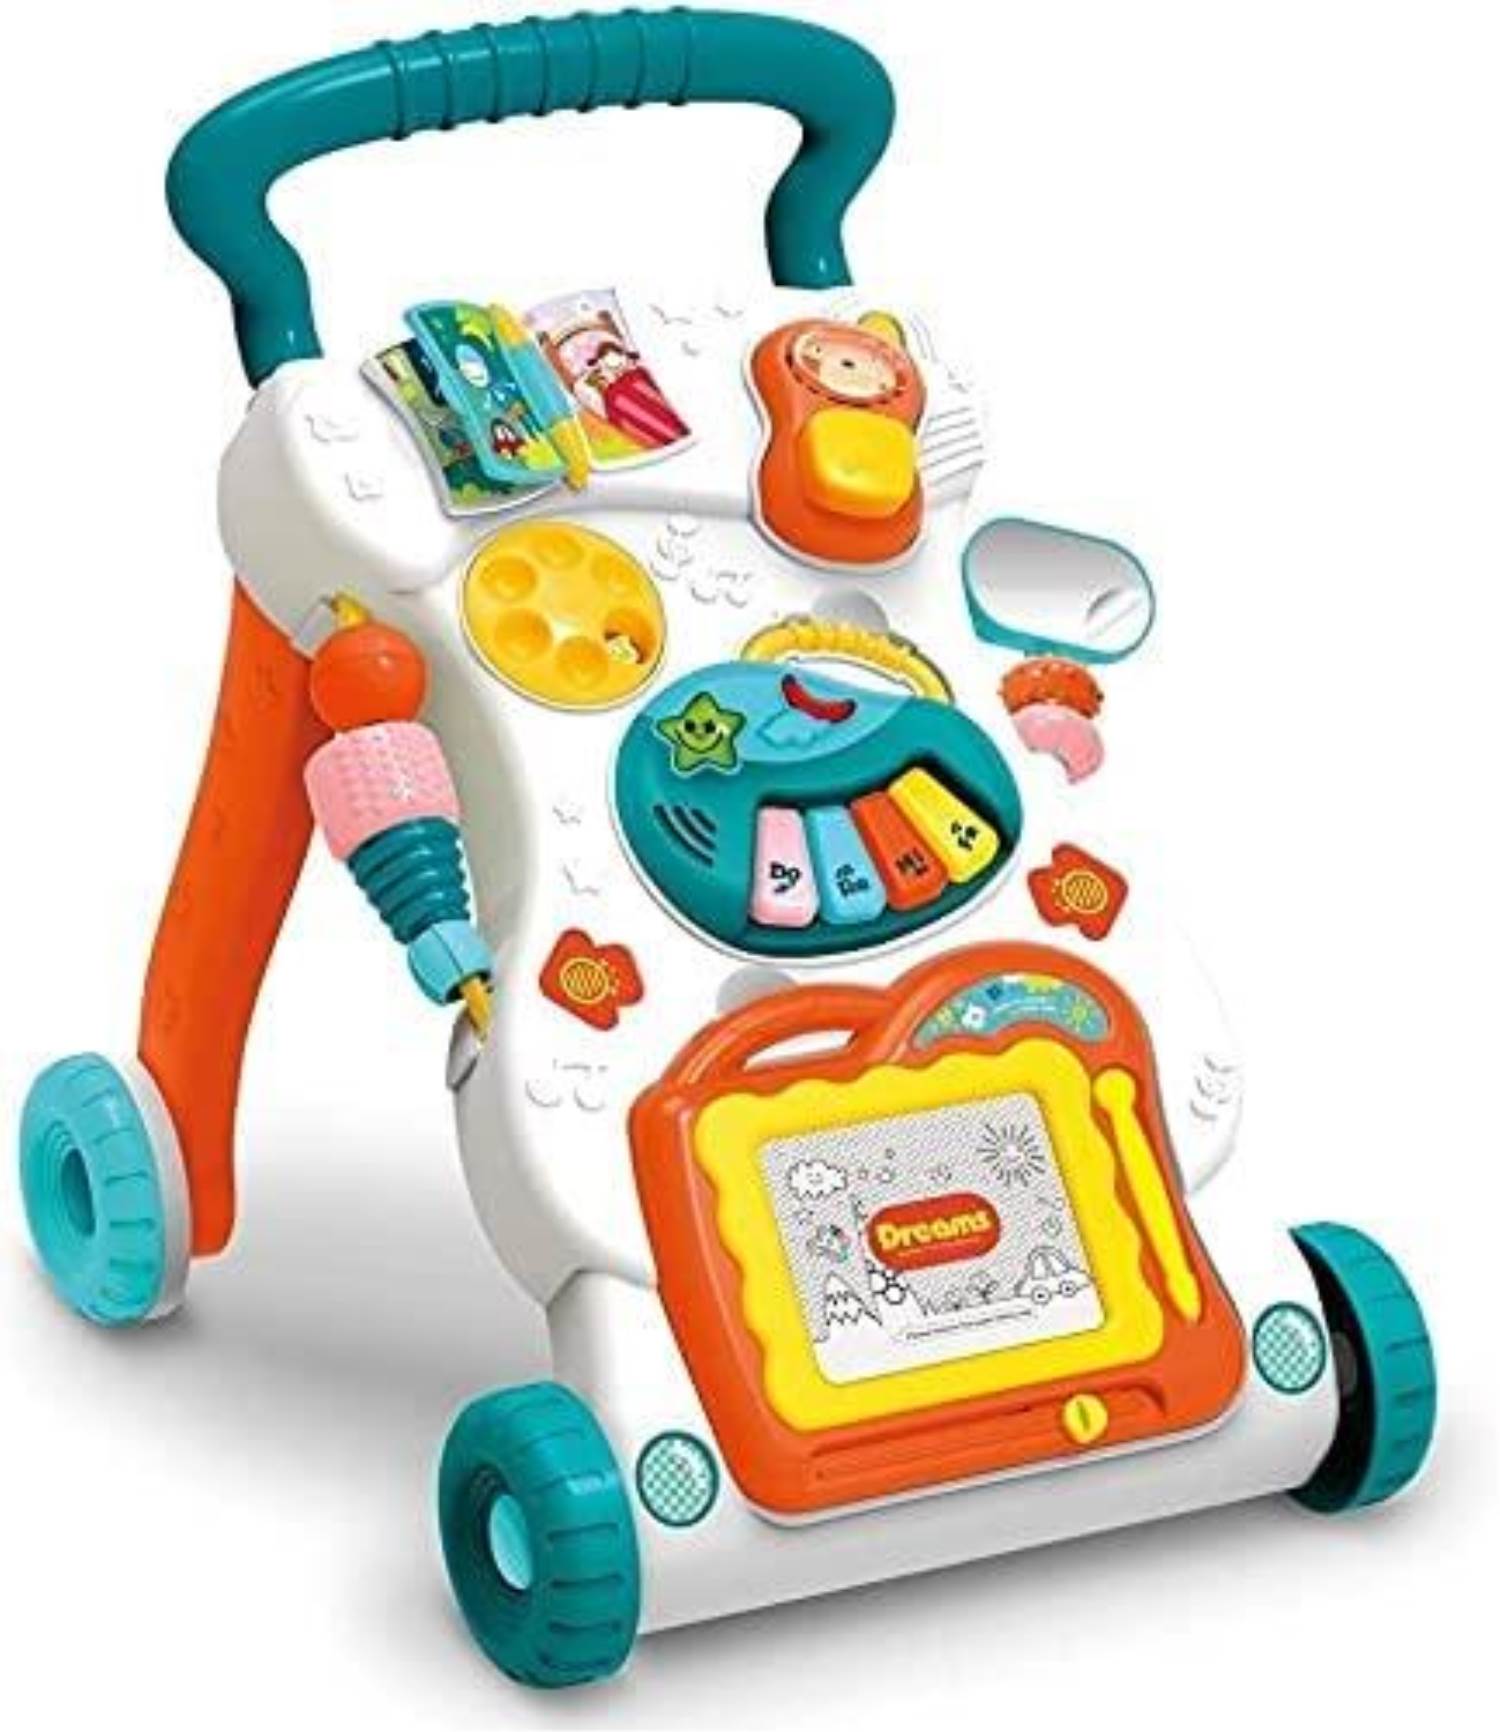 4 in 1 Baby Walker, Baby Walkers for Boys and Girls with Removable